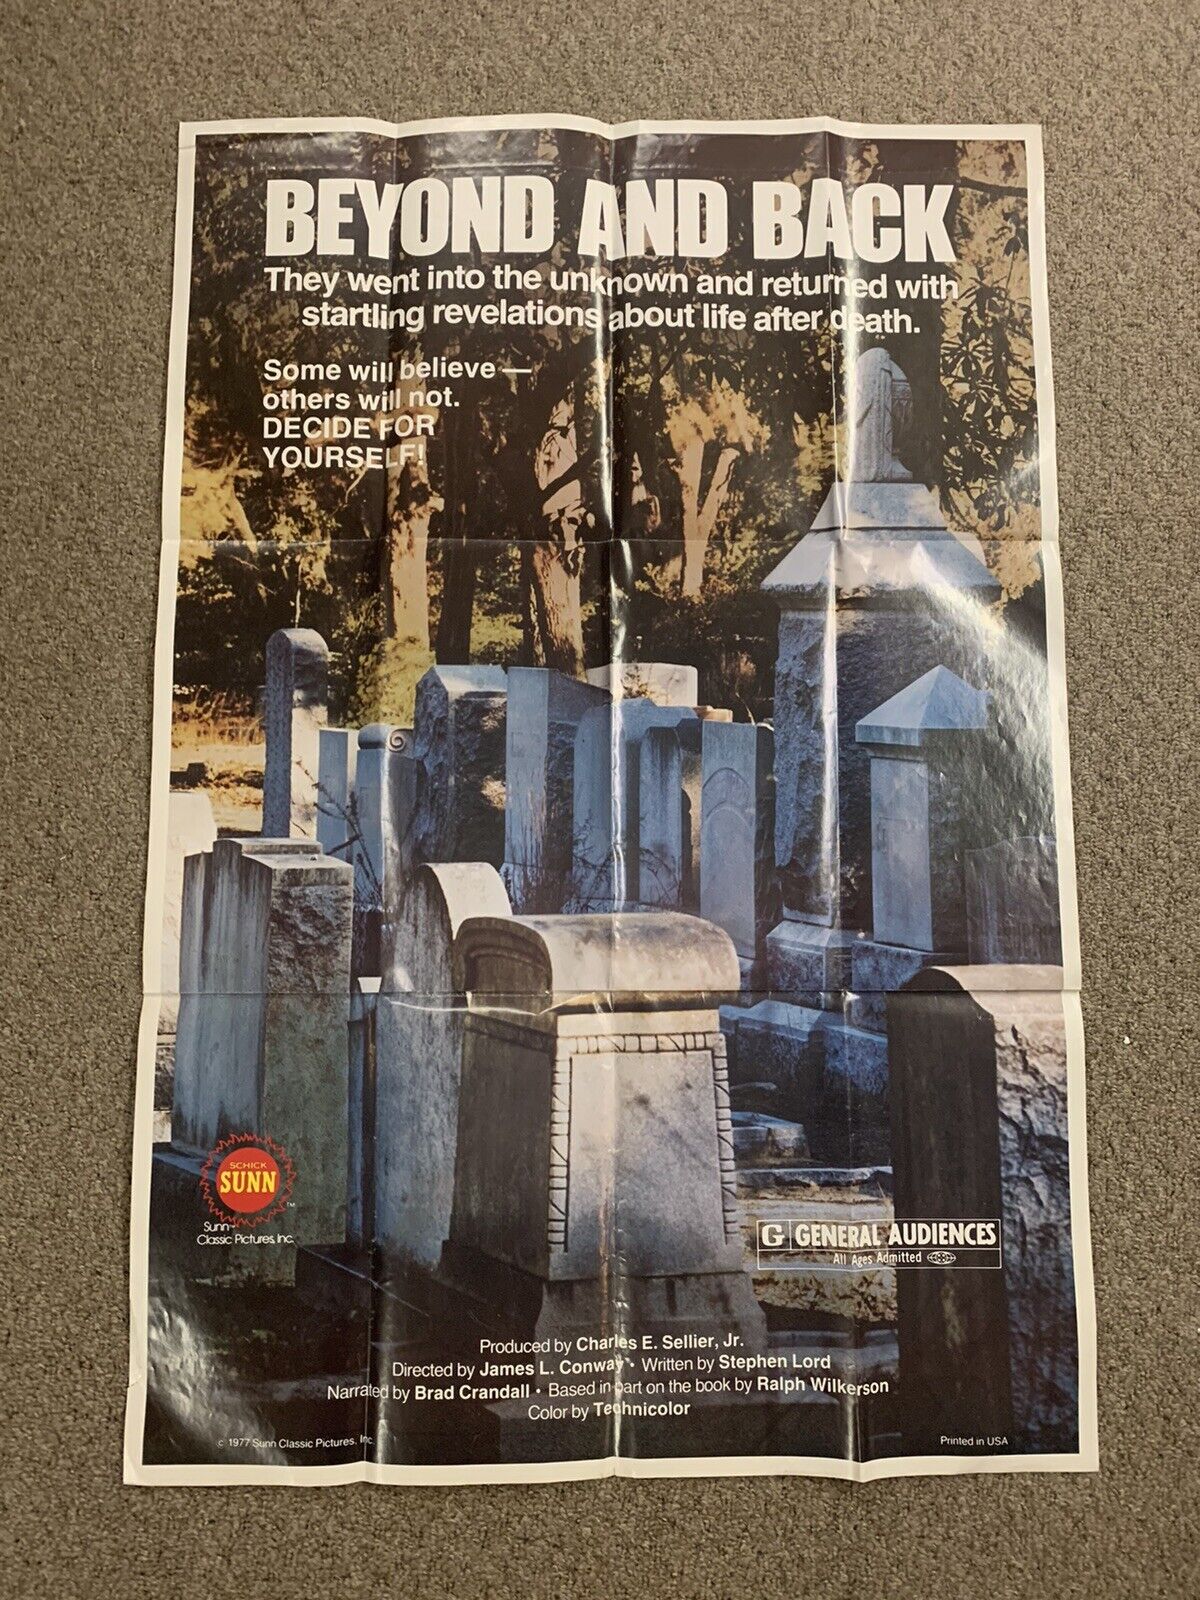 BEYOND AND BACK Original Theatrical Movie Poster 1977